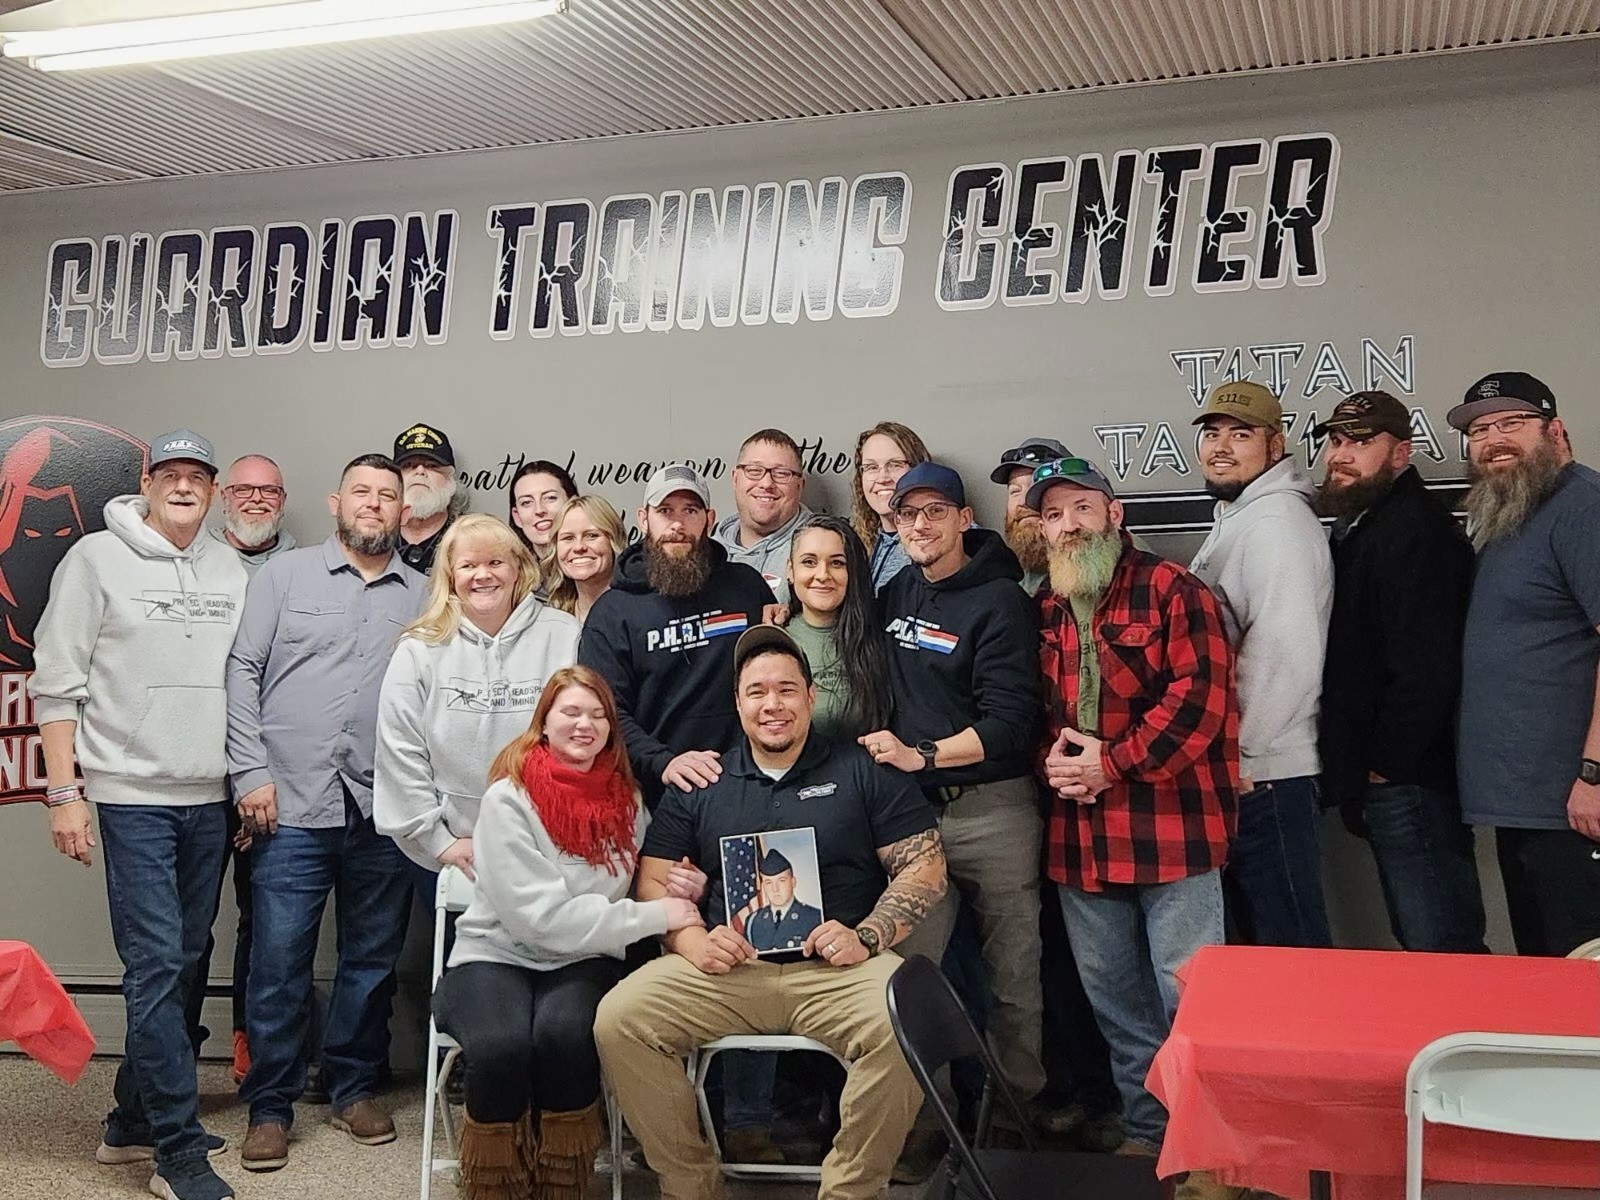 NRA 2A Day for Guardian Concepts and Titan Tactical Training Center’s Grand Opening